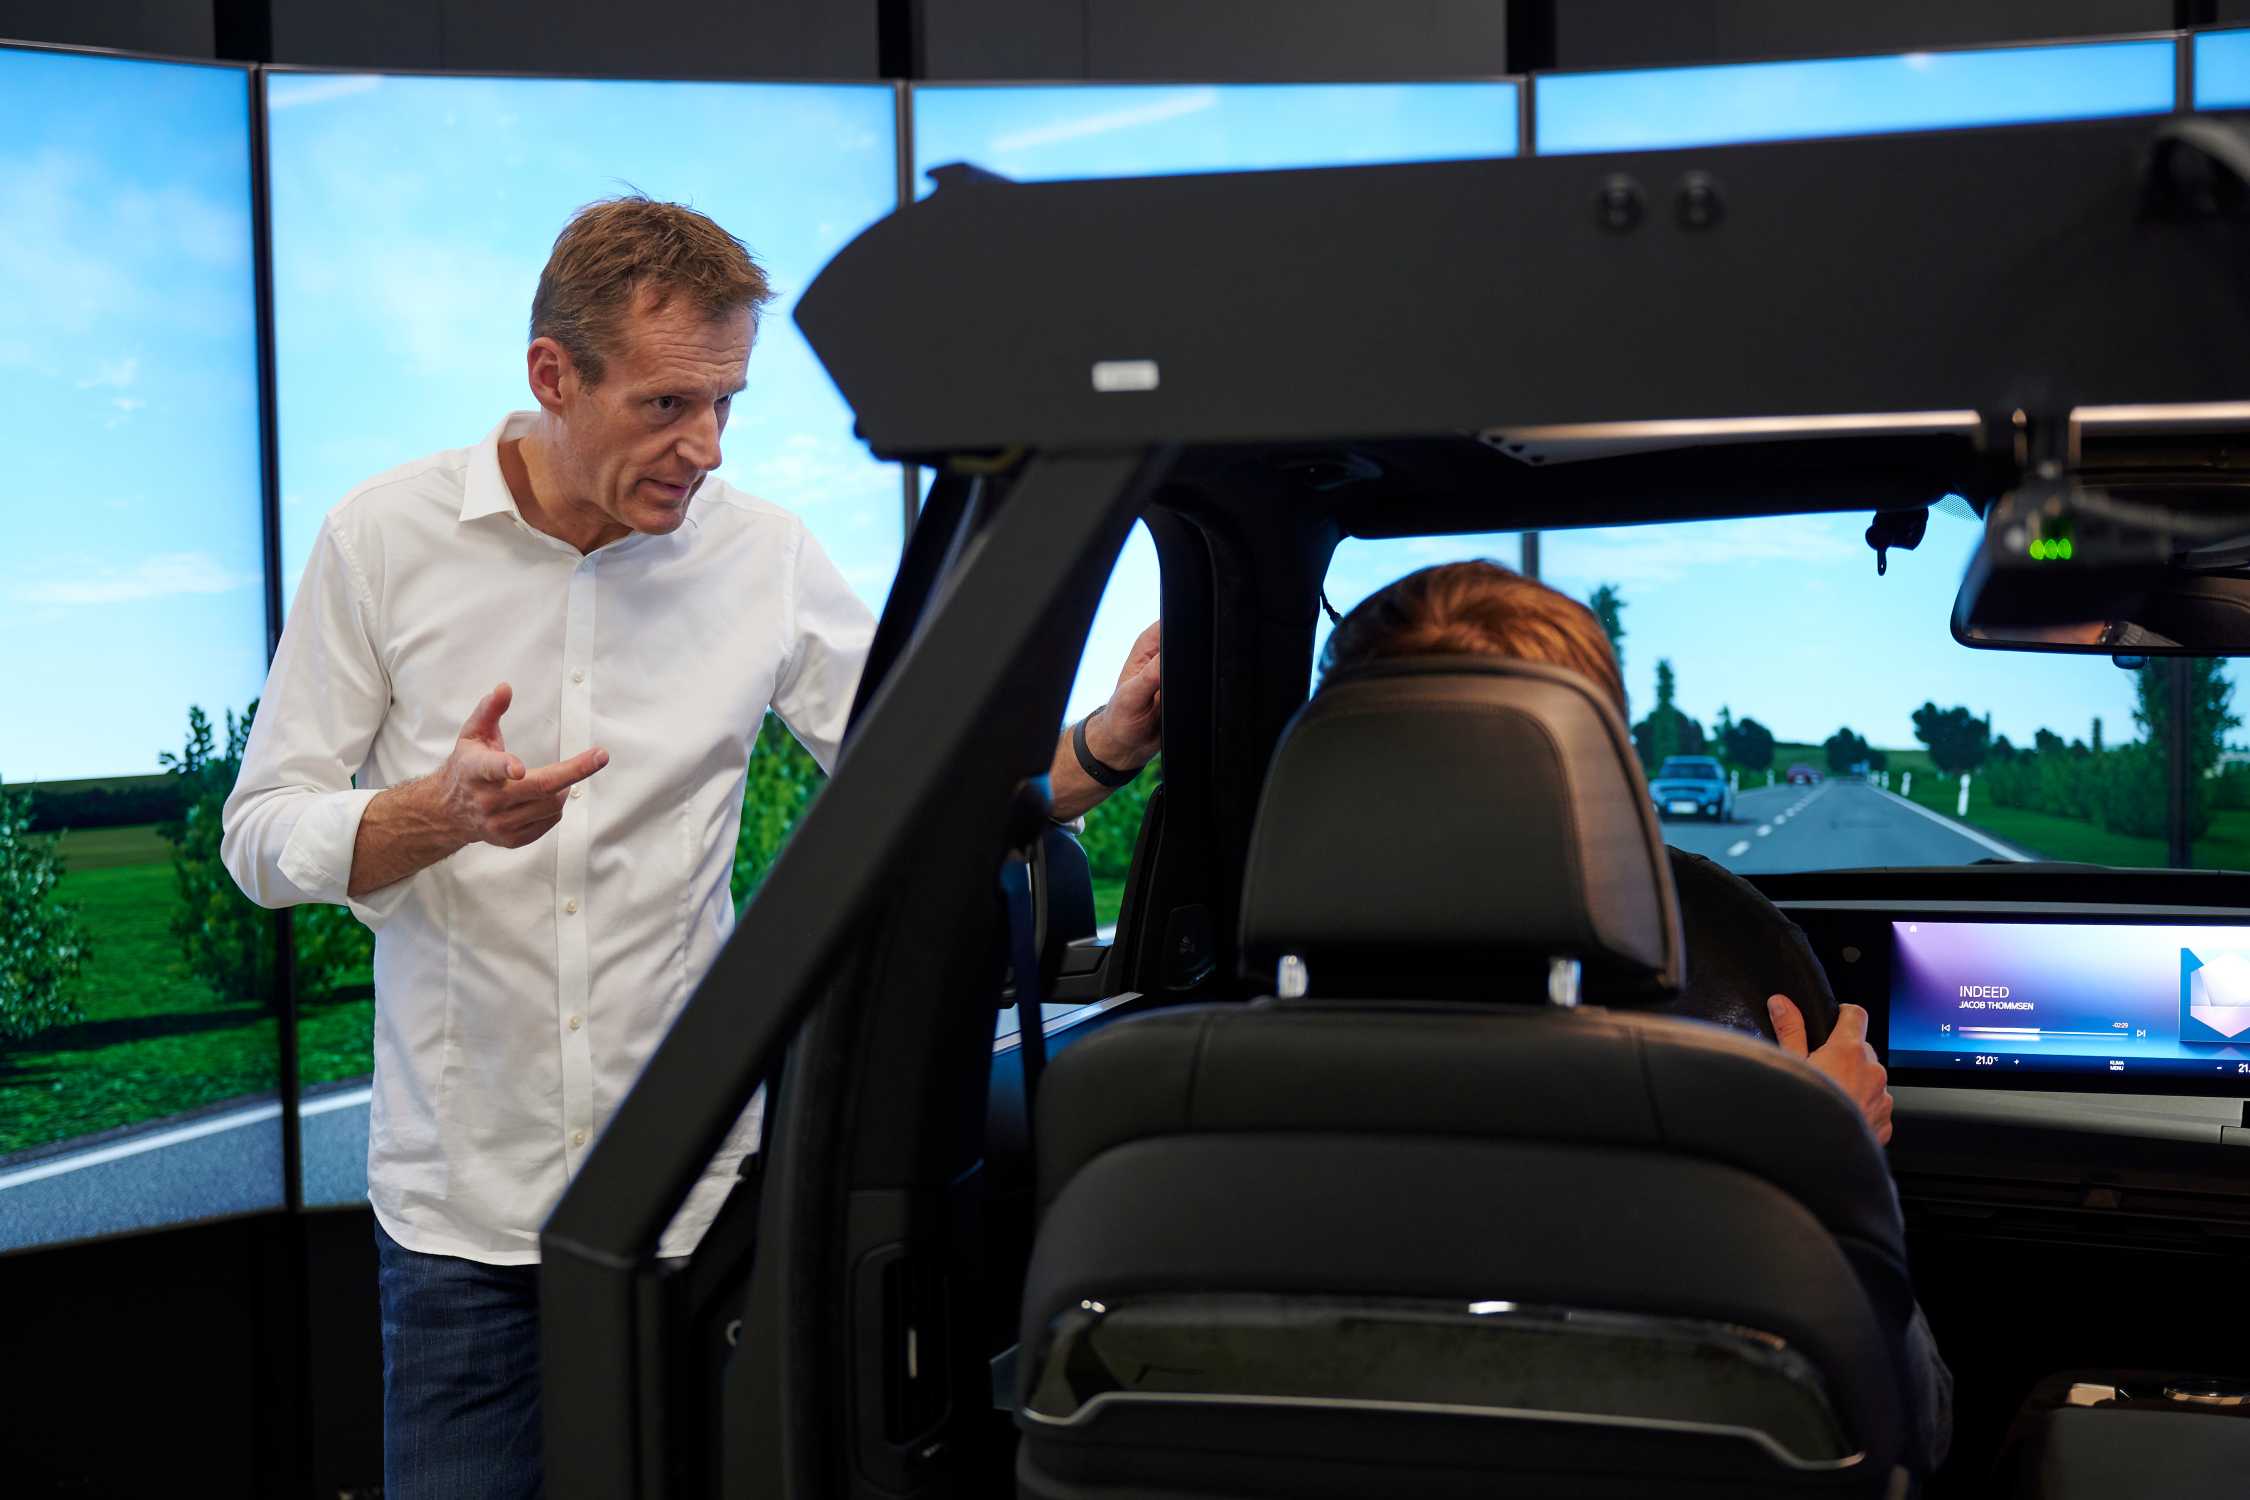 #NEXTGen 2020: Martin Peller, project lead of the new driving simulation center in conversation with a test person. (11/20)